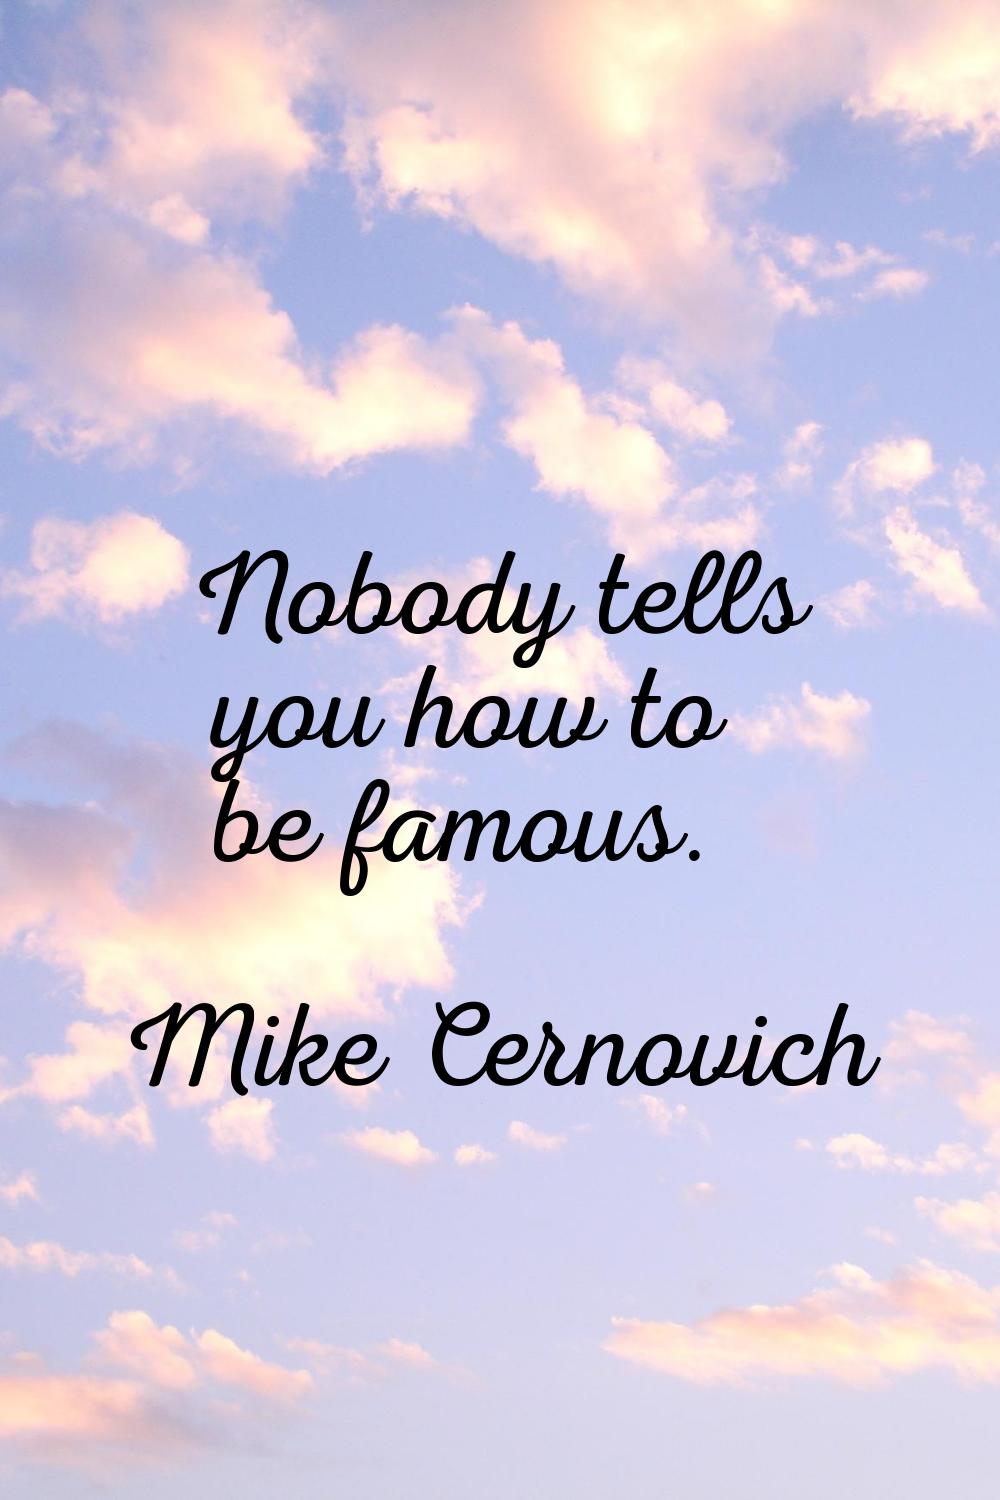 Nobody tells you how to be famous.